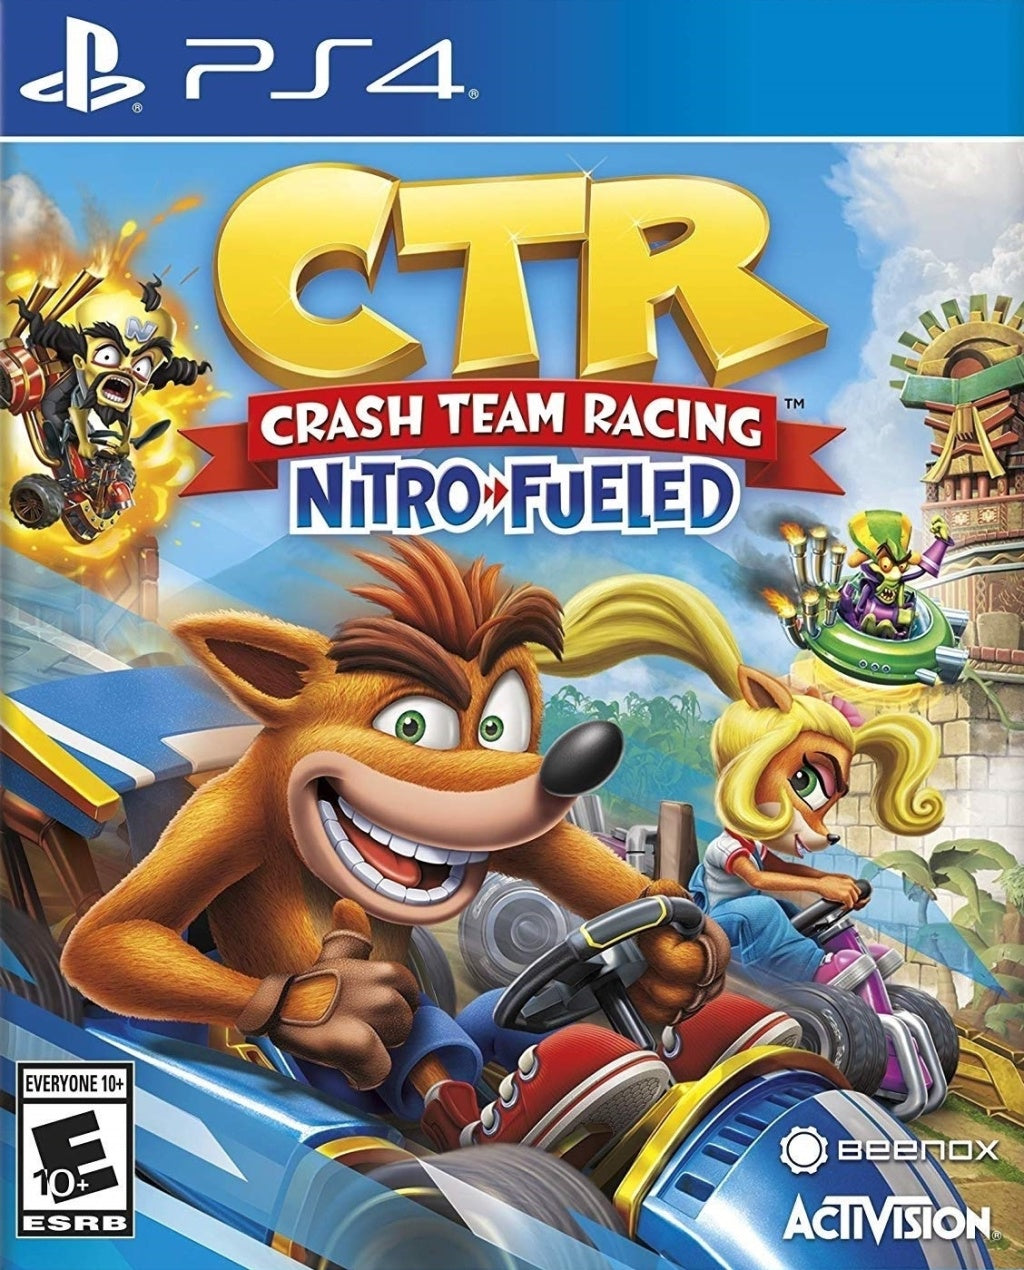 Crash Team Racing CTR: Nitro Fueled - PS4 (Pre-owned)